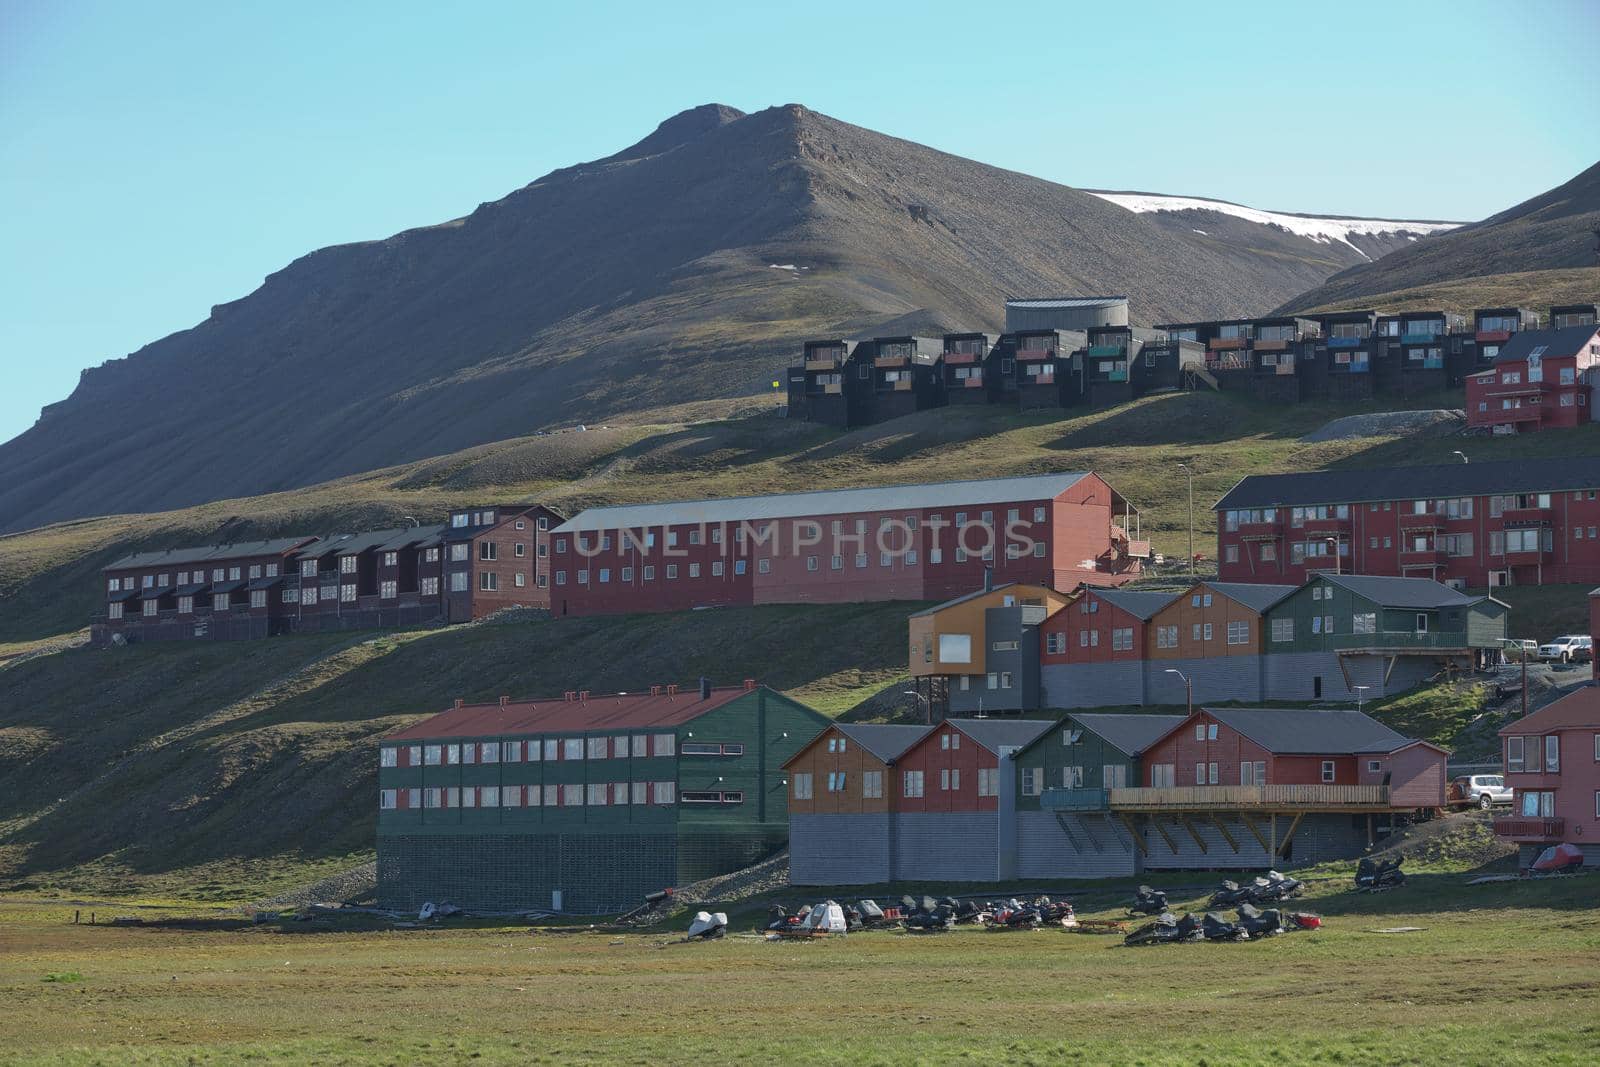 Longyearbyen, Svalbard, Norway - July 22, 2017: Traditional colorful wooden houses on a sunny day in Longyearbyen Svalbard.